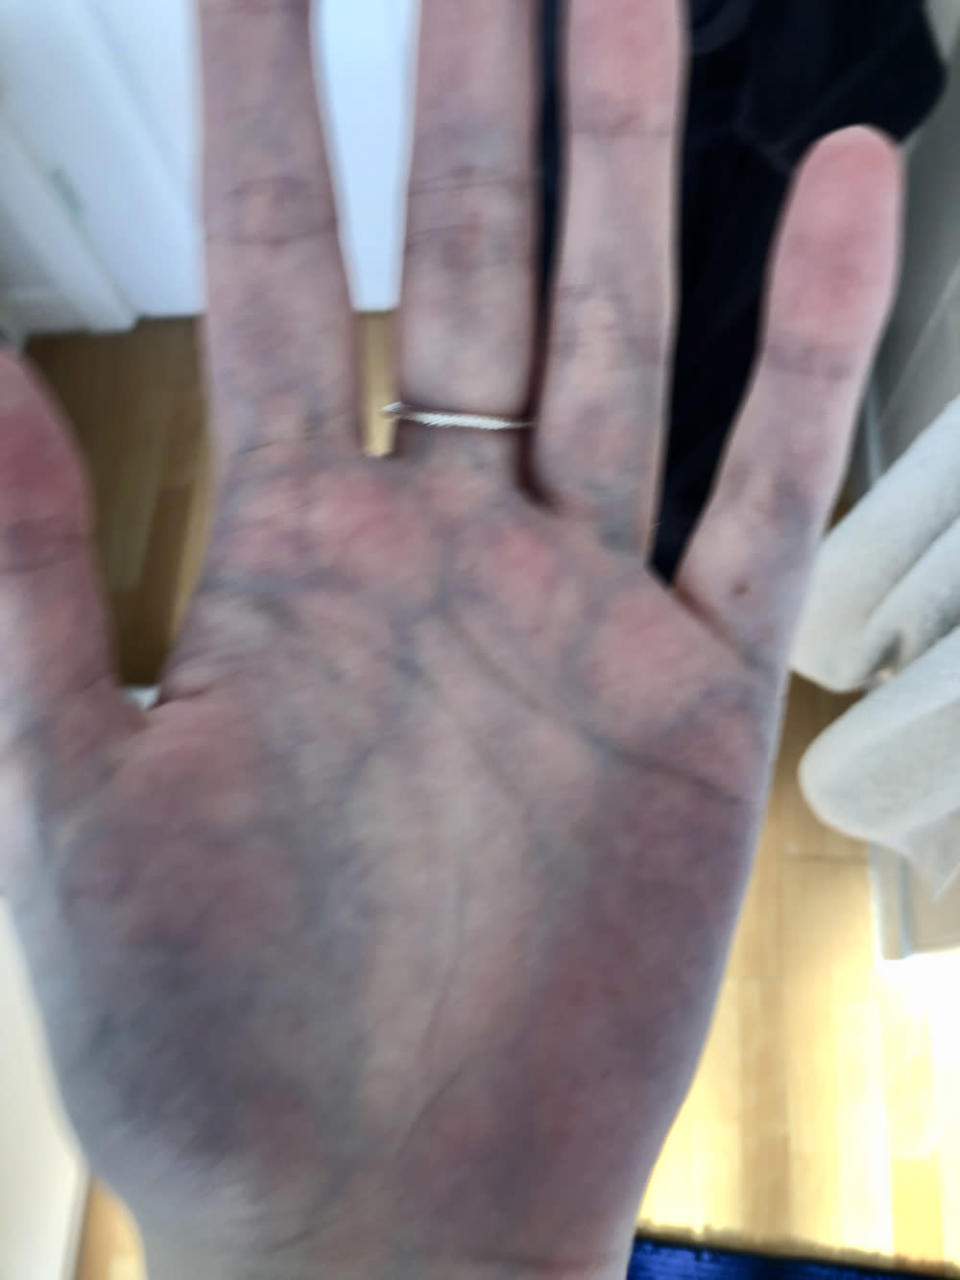 Katherine Frances, 29, said she often has blue hands because of her poor circulation (Collect/PA Real Life)